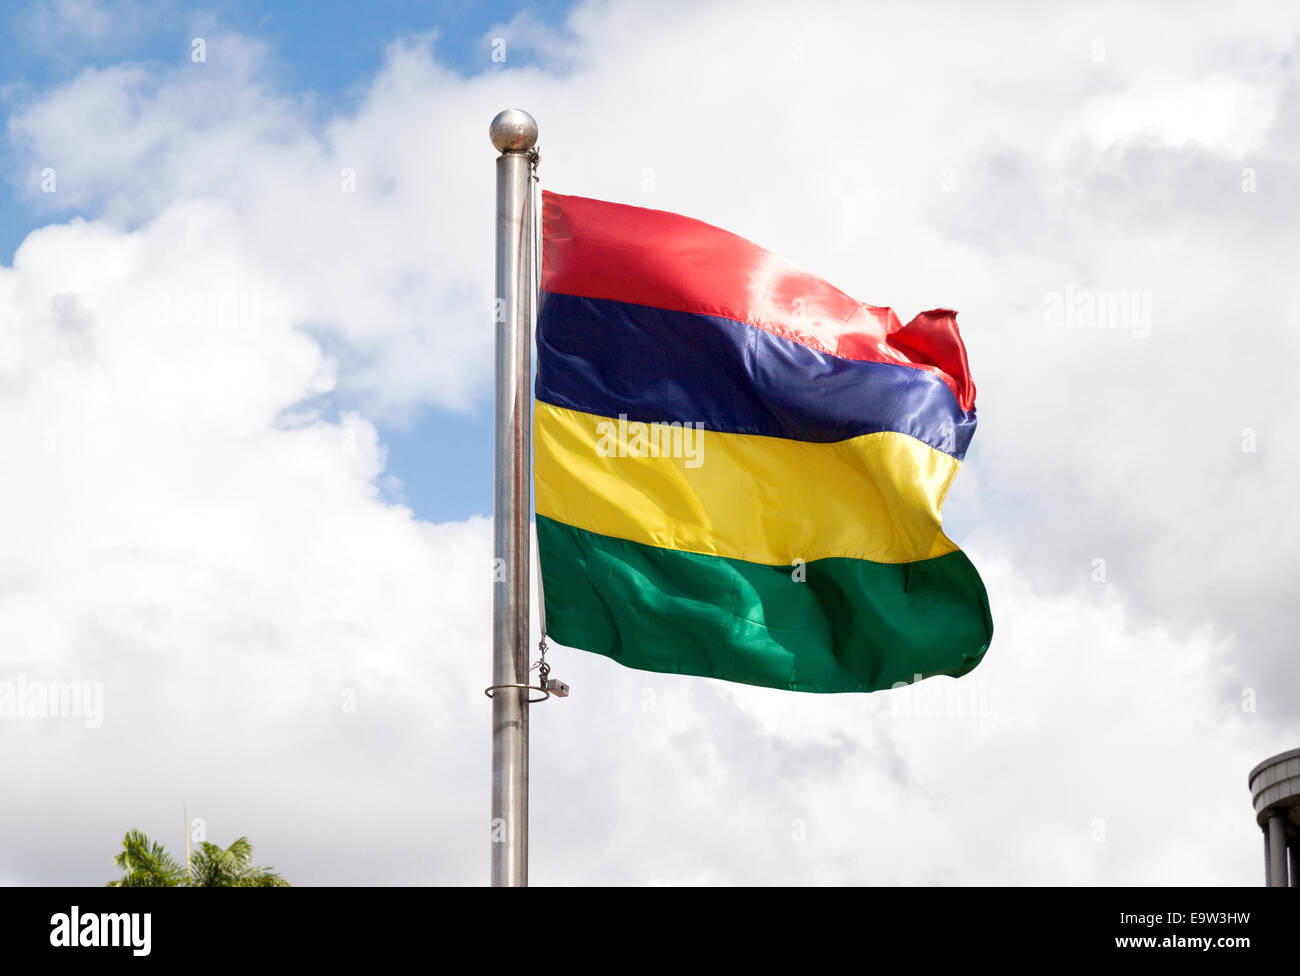 Mauritian flag flying from a flagpole against the sky, Mauritius Stock Photo